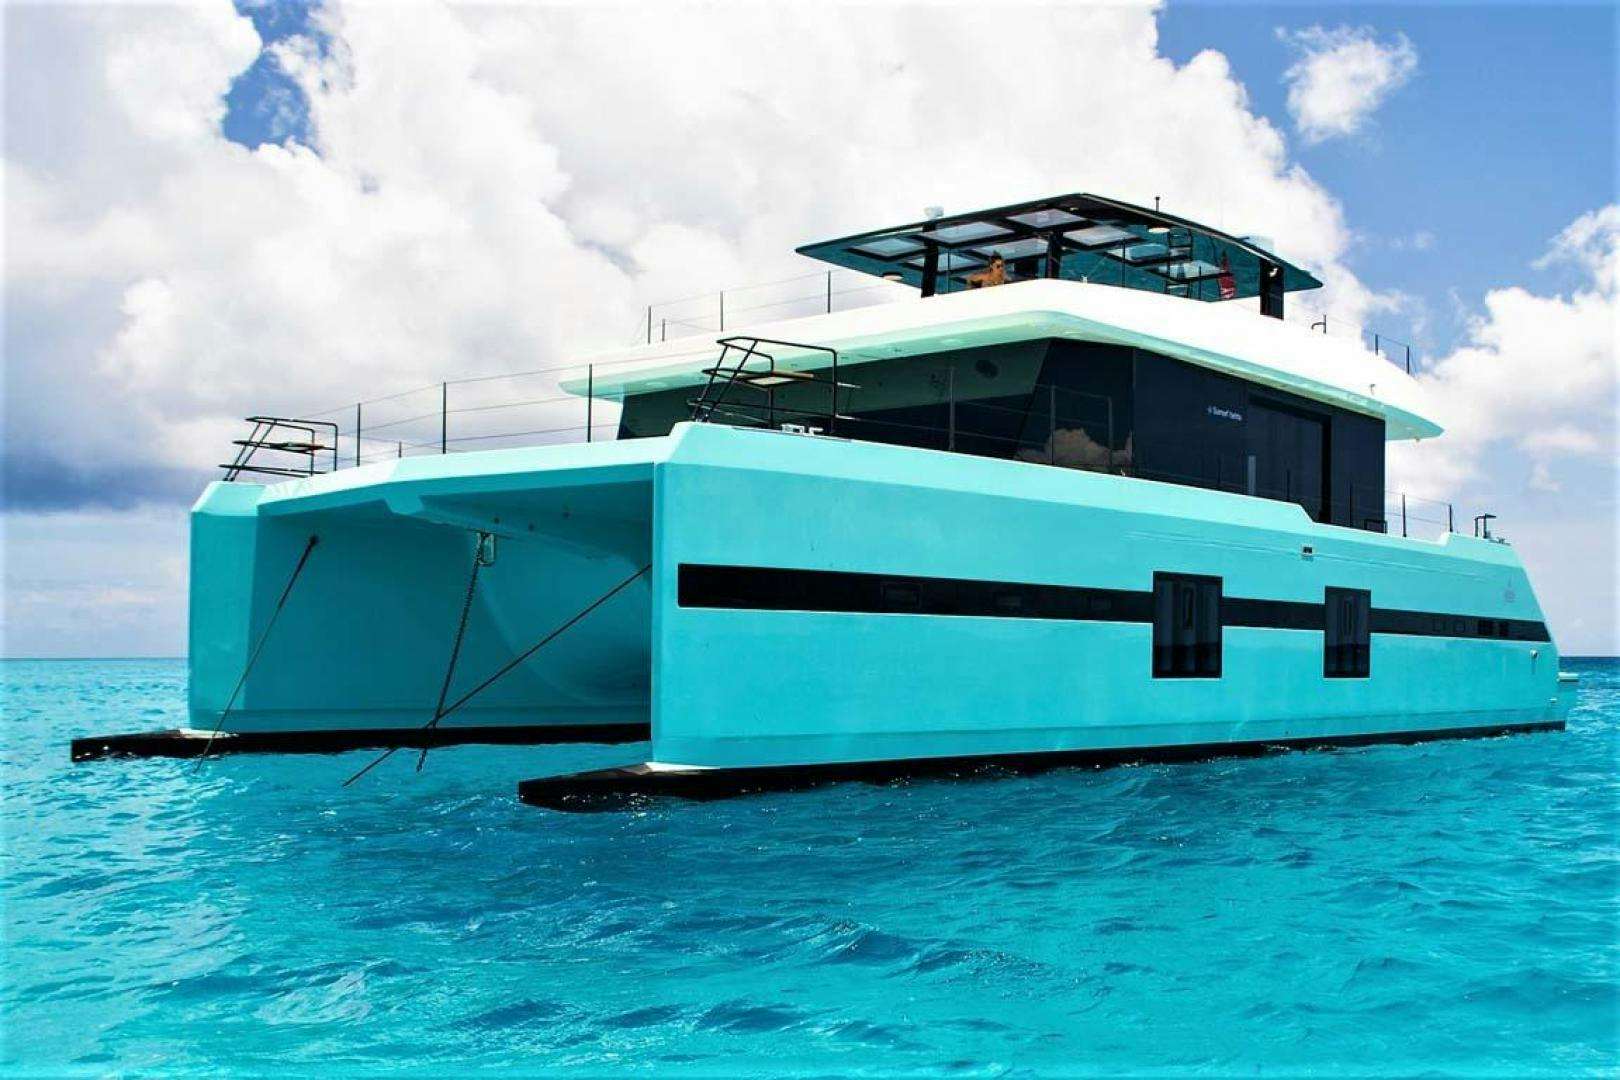 Rock star 2.0
Yacht for Sale